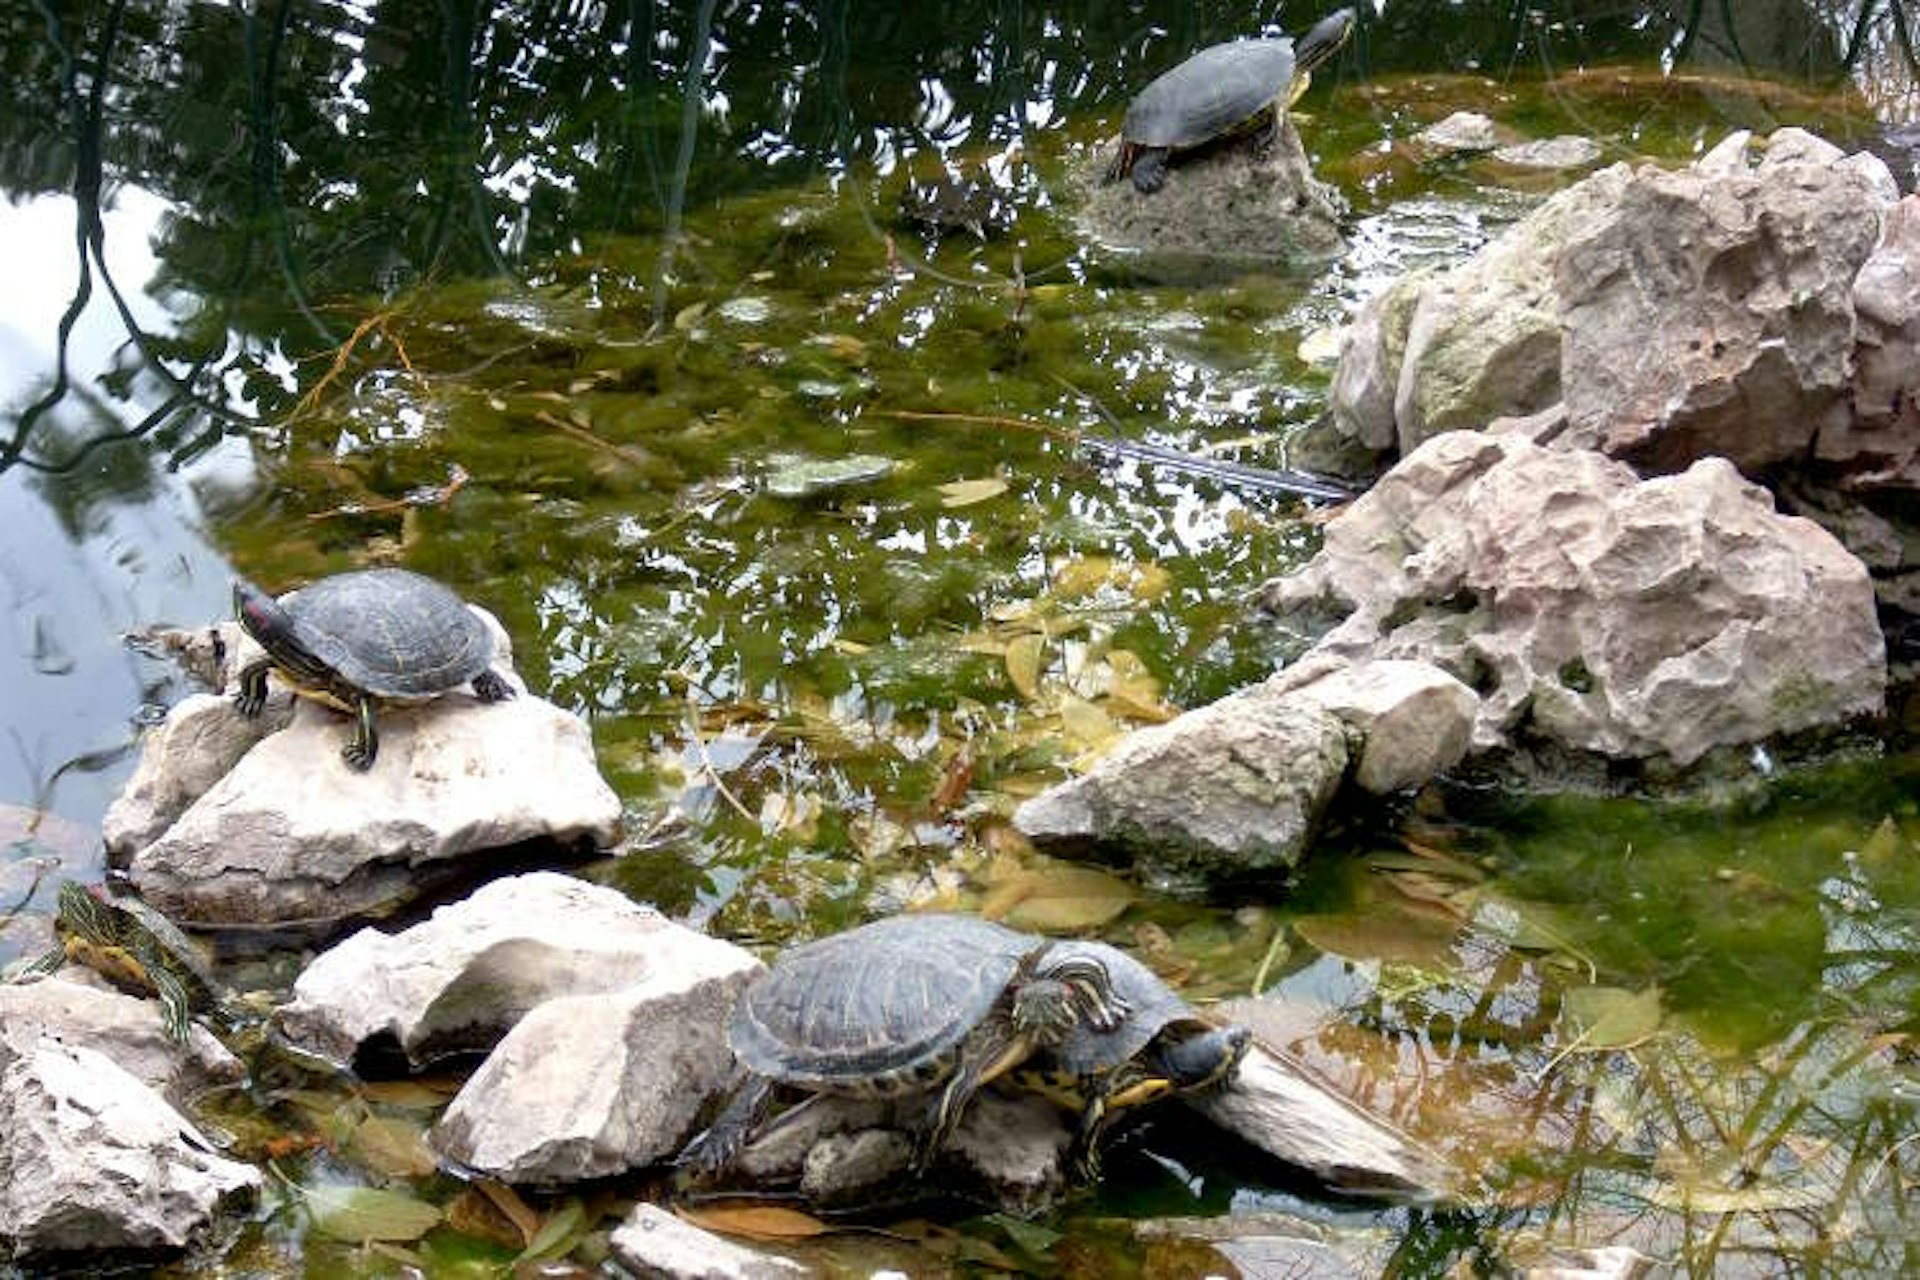 Fountain with turtles in Zappeio Gardens. Image by Alexis Averbuck / Lonely Planet